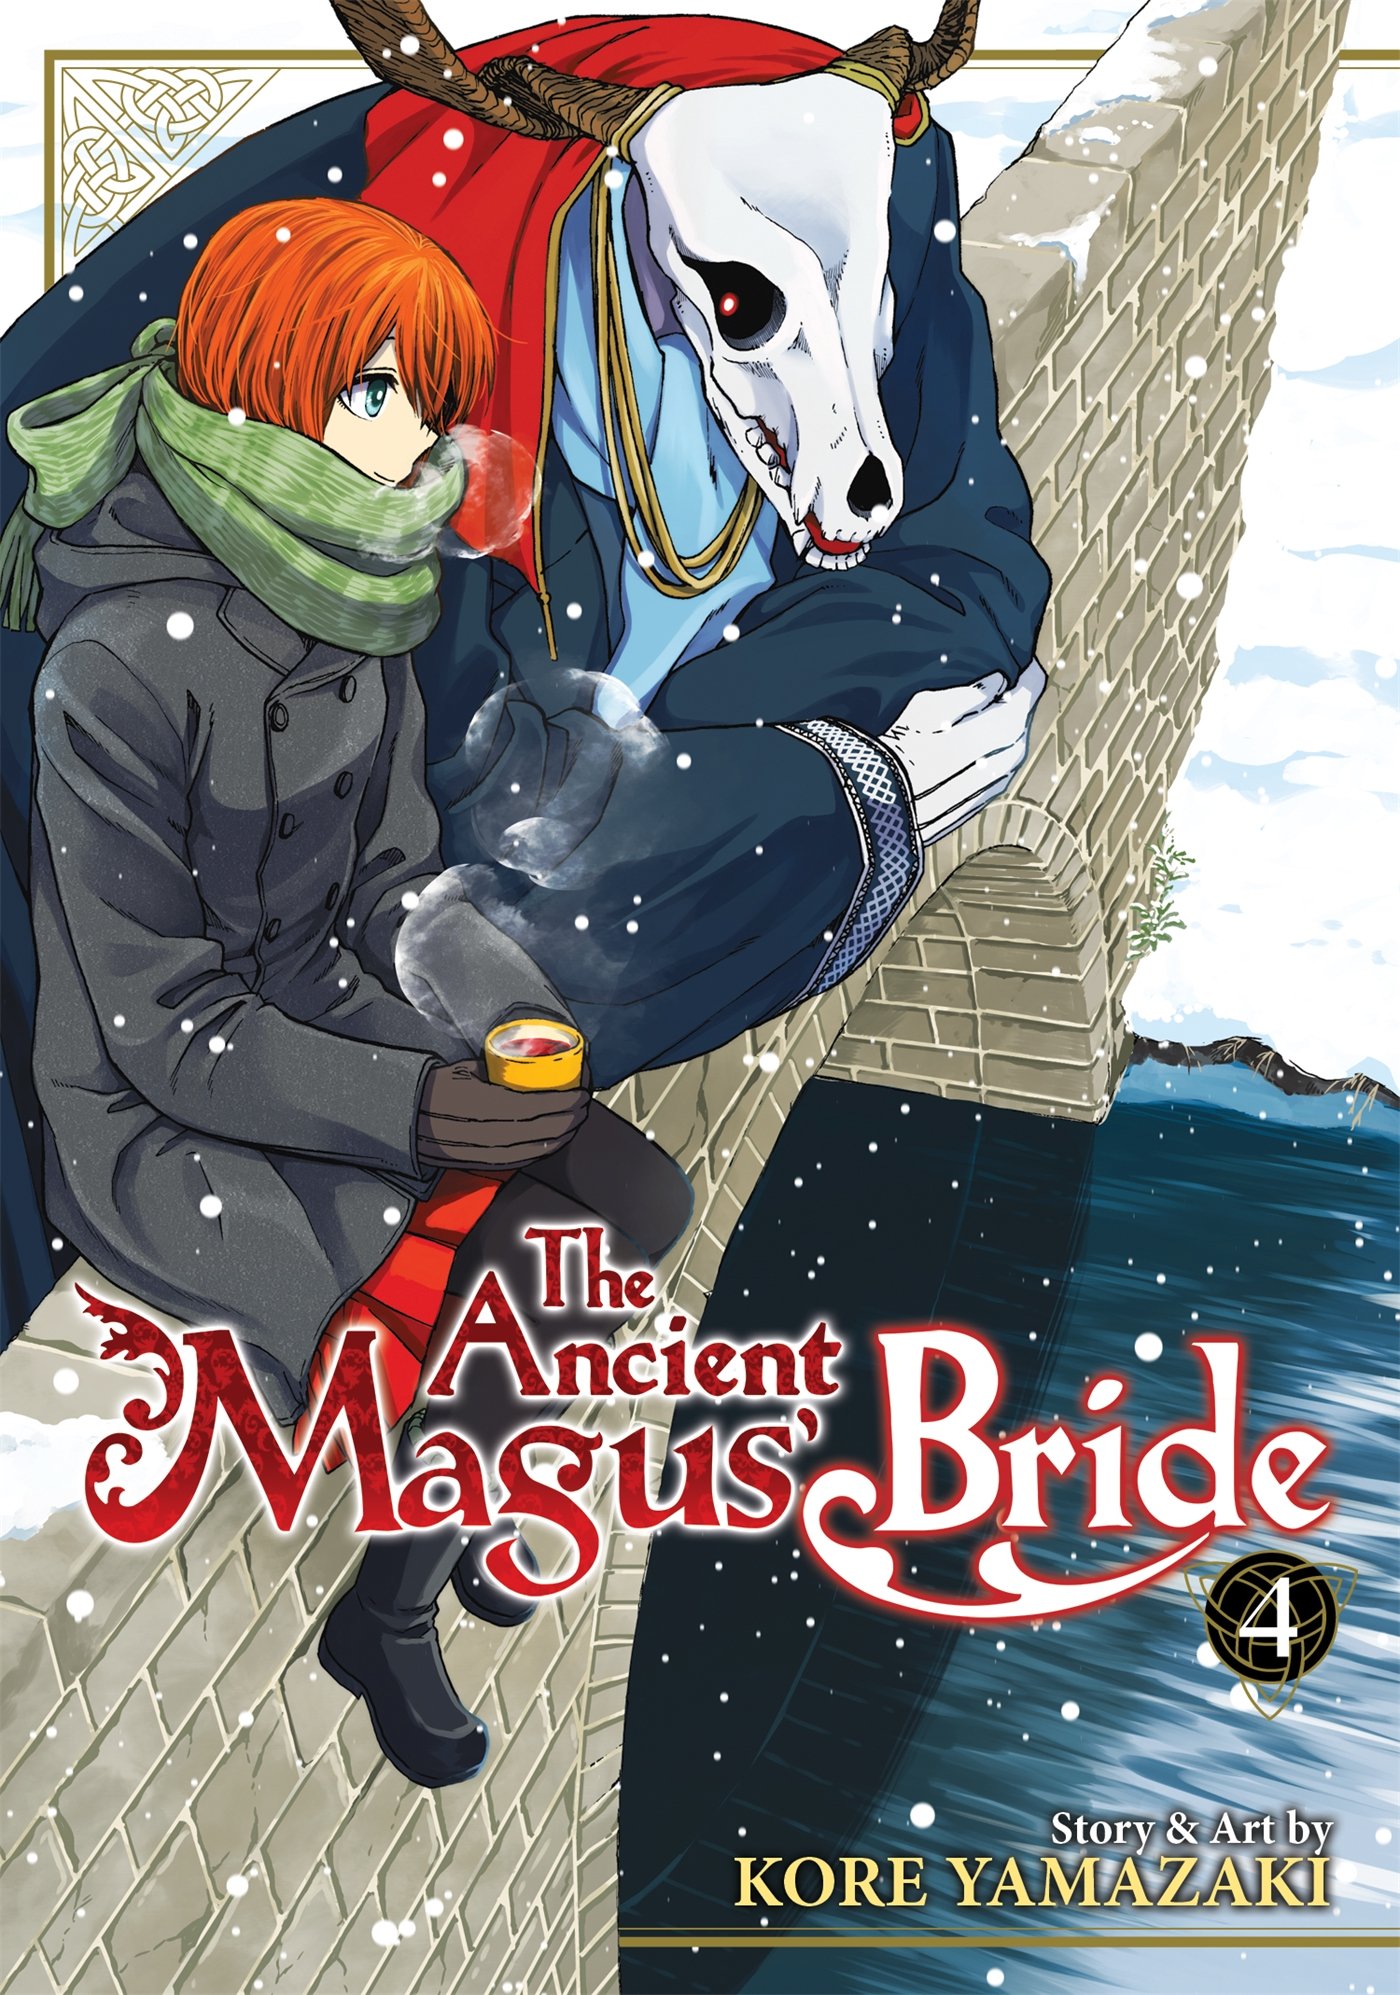 Amazing The Ancient Magus' Bride Pictures & Backgrounds